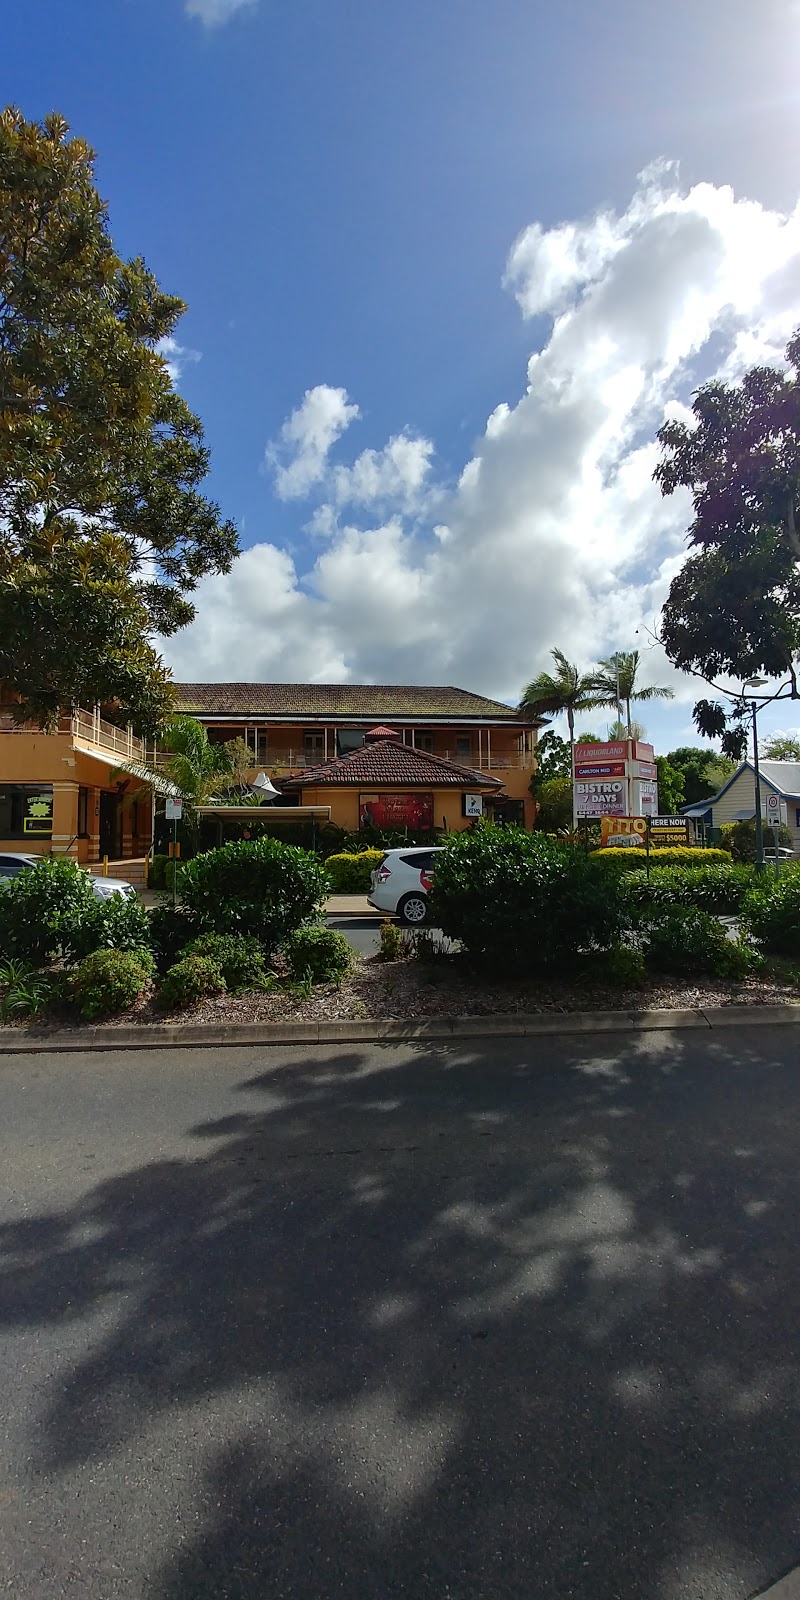 Royal Mail Hotel | lodging | 120 Poinciana Ave, Tewantin QLD 4565, Australia | 0754471102 OR +61 7 5447 1102